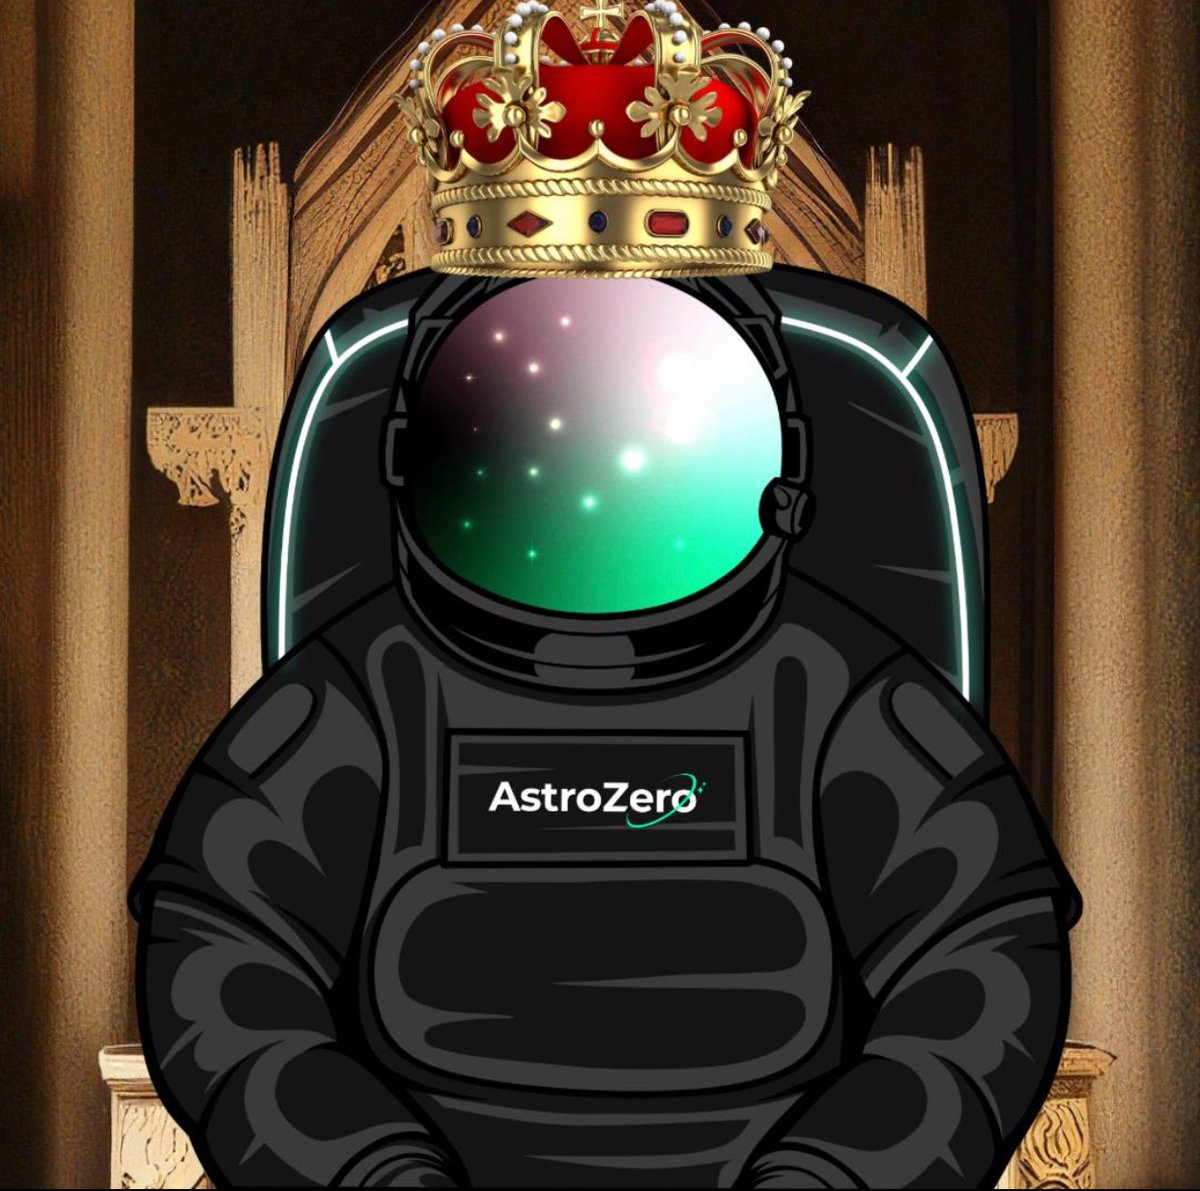 Faze Clan X Elonone Collab!!

ITS FINAL! We are collating with Elonone!!! 

Rocketdash will never launch but that's okay we like
Their spirit 🤣

#gamers #gamedev #faze #rocketdash #elonone #p2e #NFT #NFTGiveaway #scam #fraud